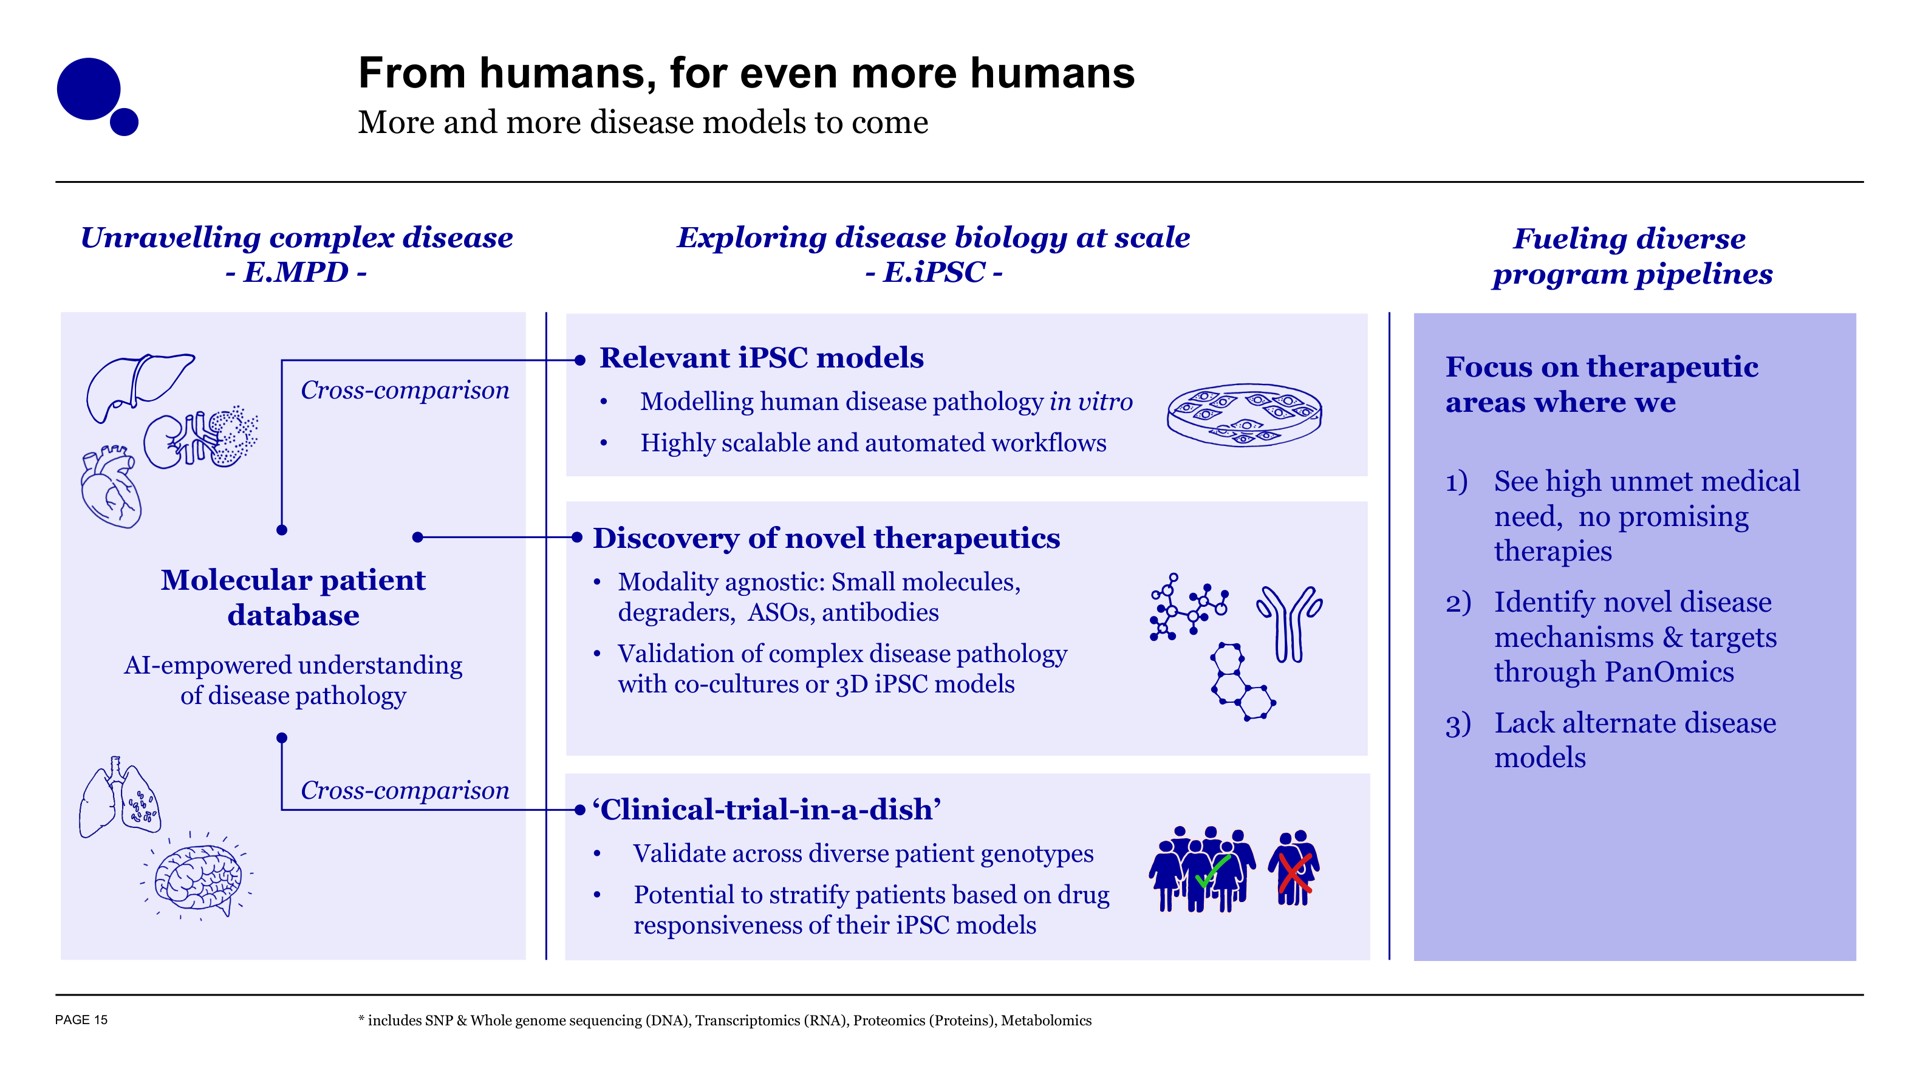 from humans for even more humans | Evotec